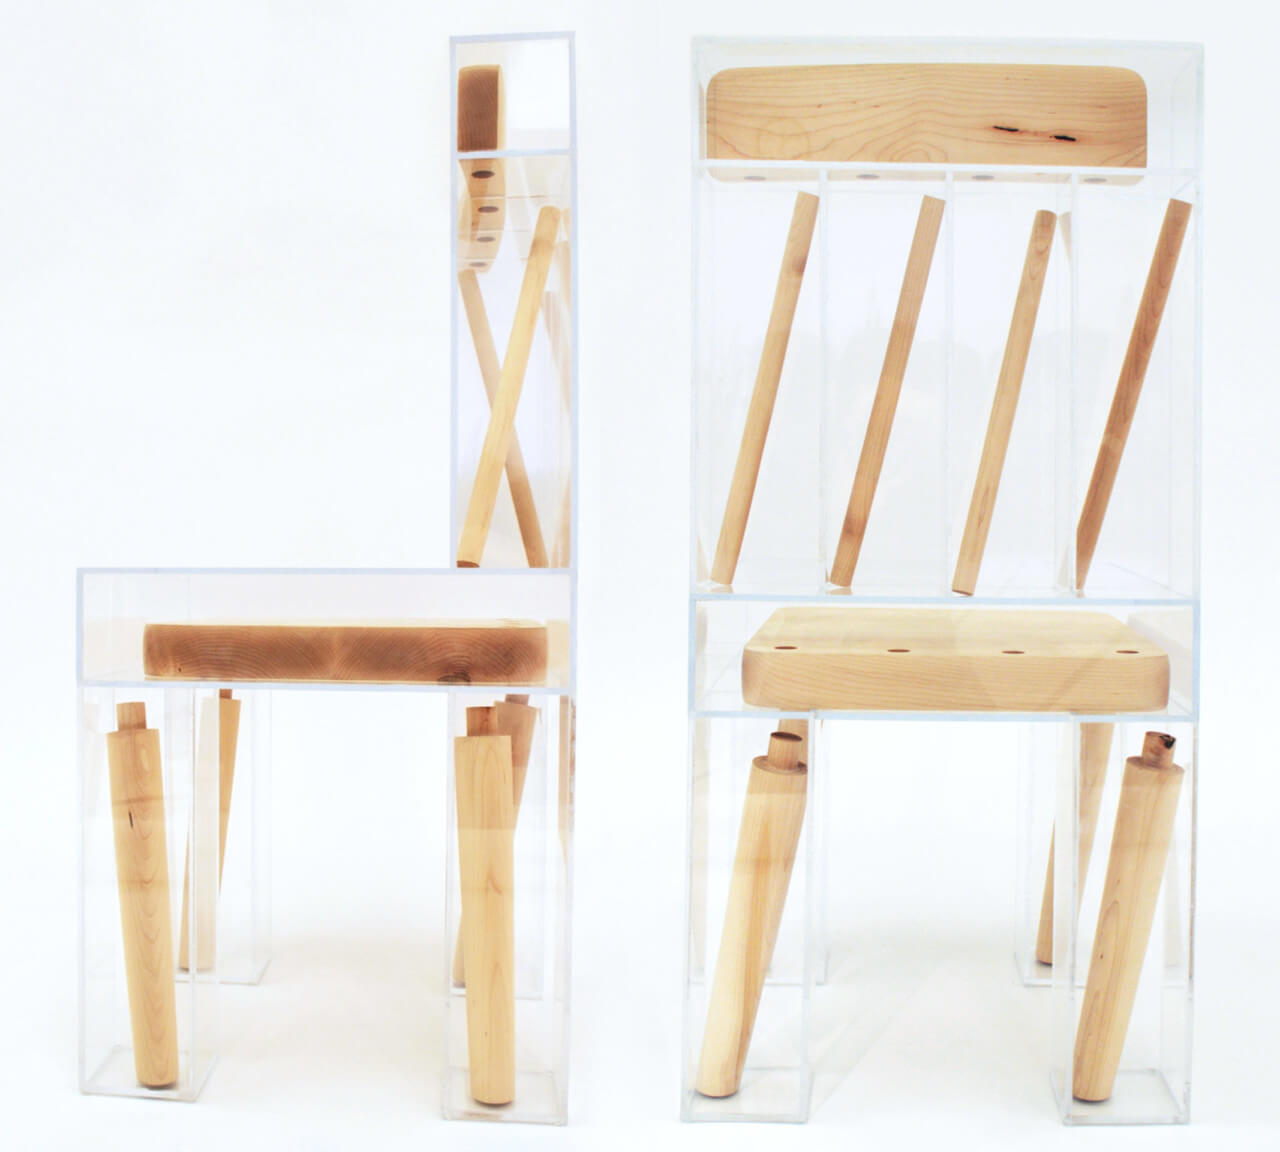 A wooden chair encased in clear resin, designed by joyce lin